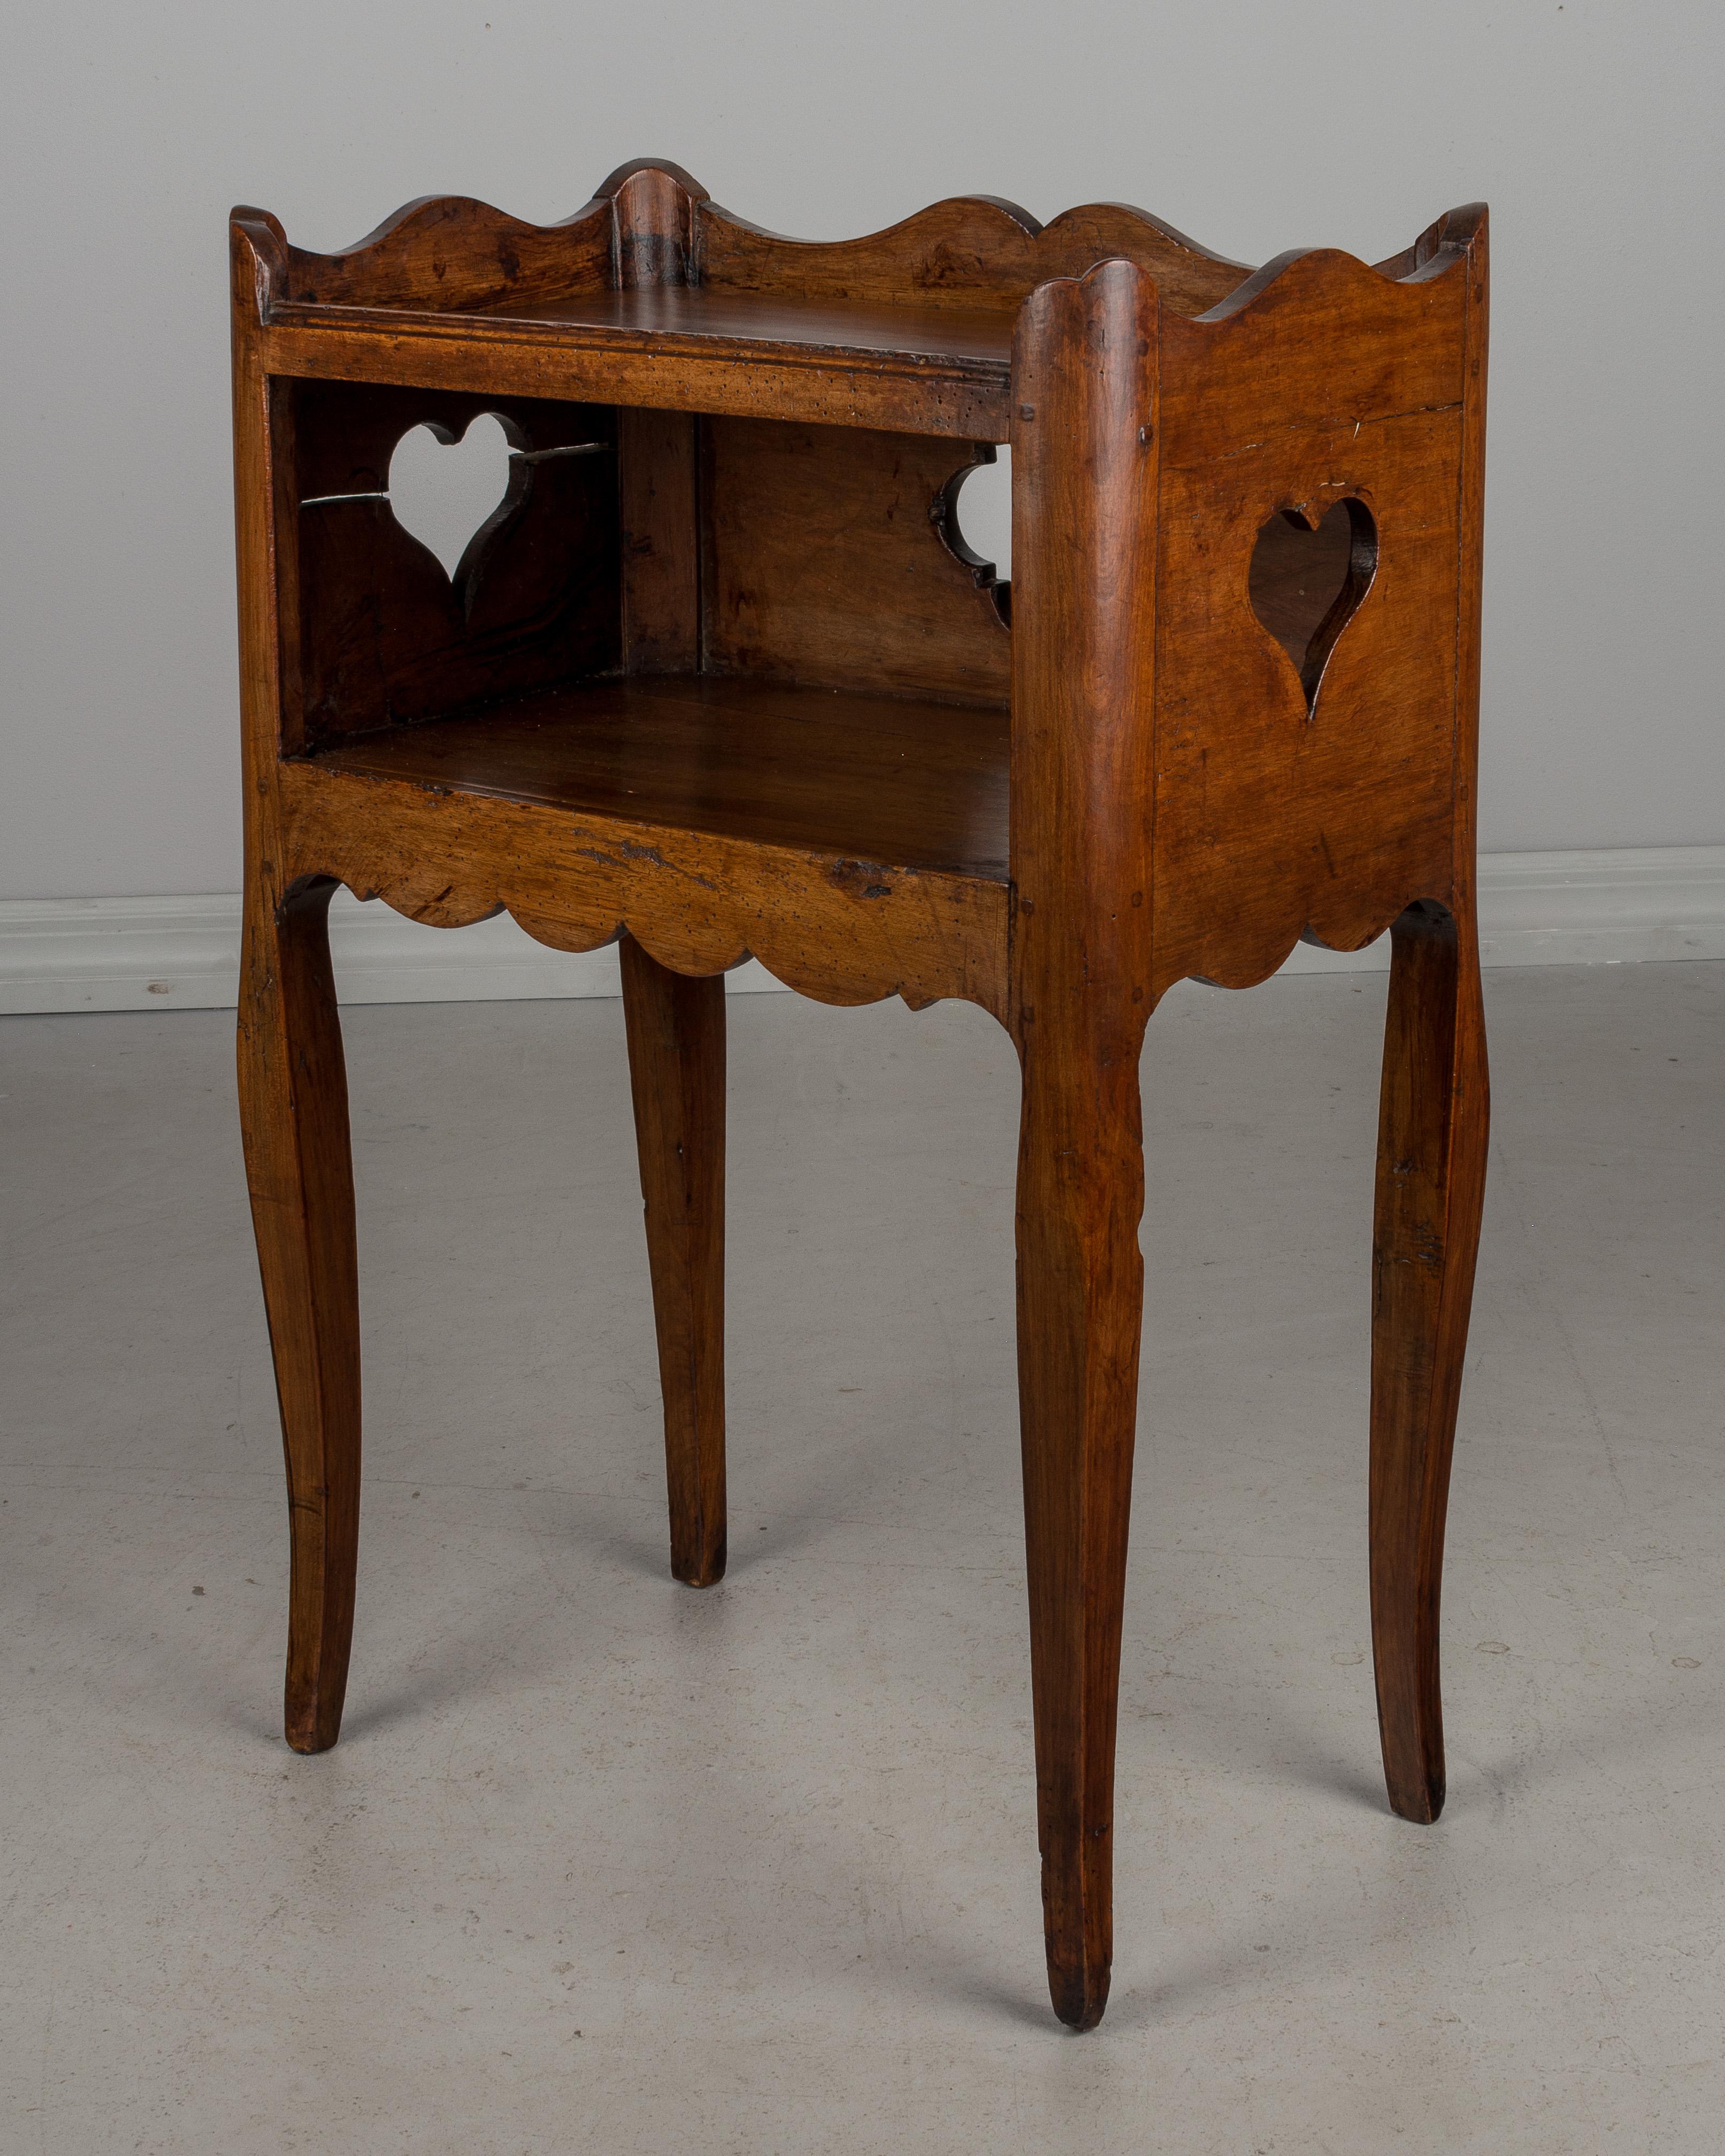 An early 19th century Louis XV Country French side table or nightstand made of solid walnut, with a pierced quatrefoil shaped cut-out on the back and hearts cut-out on the sides. Scalloped apron and gallery surrounding the upper shelf. Slender